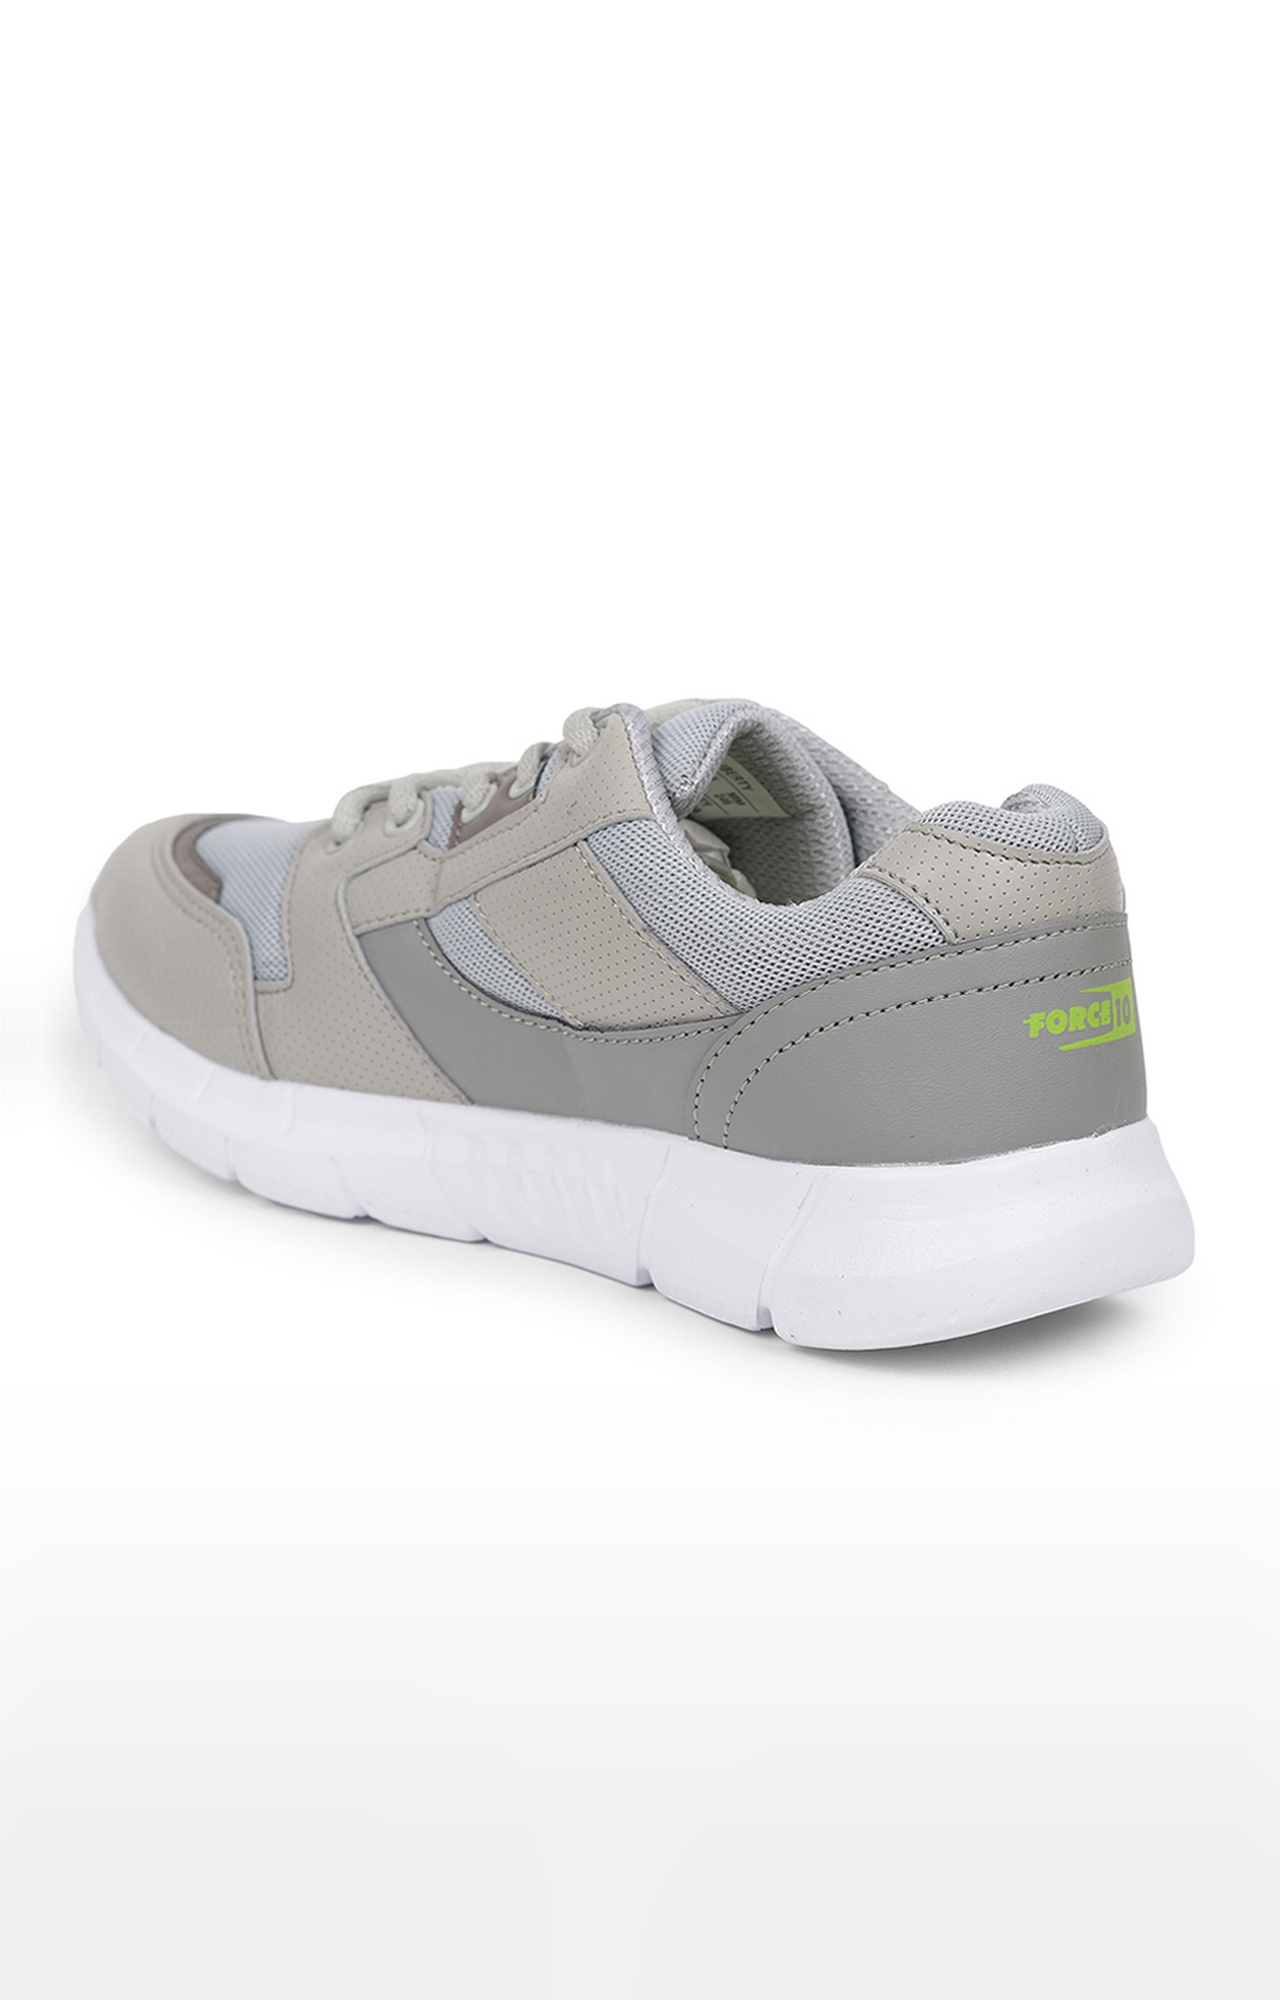 Force 10 by Liberty Women Grey Running Shoes